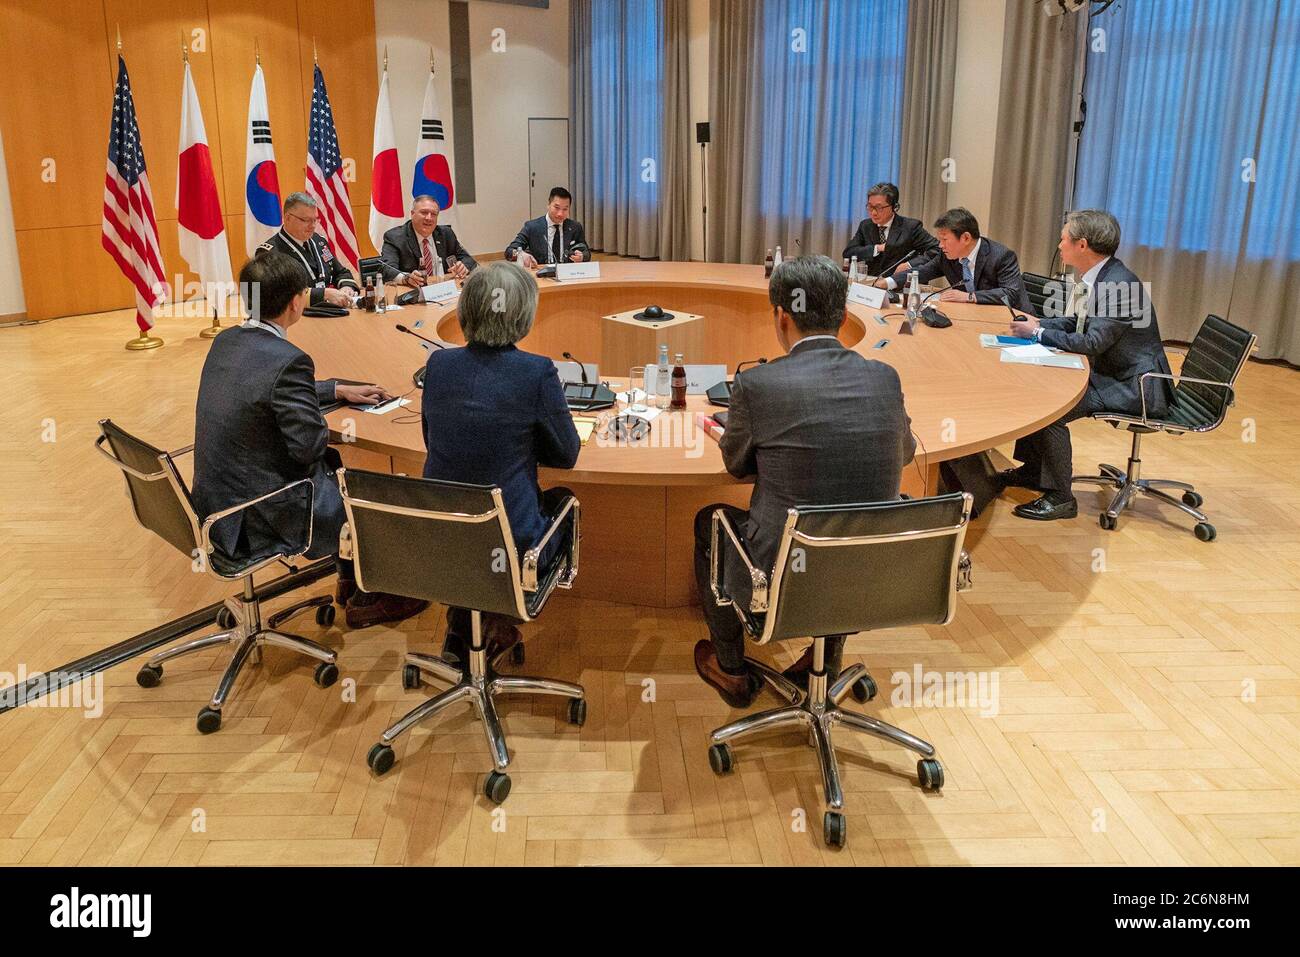 U.S. Secretary of State Pompeo meets with Japanese Foreign Minister Toshimitsu Motegi and Republic of Korea Foreign Minister Kyung-wha Kang in Munich on February 15, 2020 Stock Photo